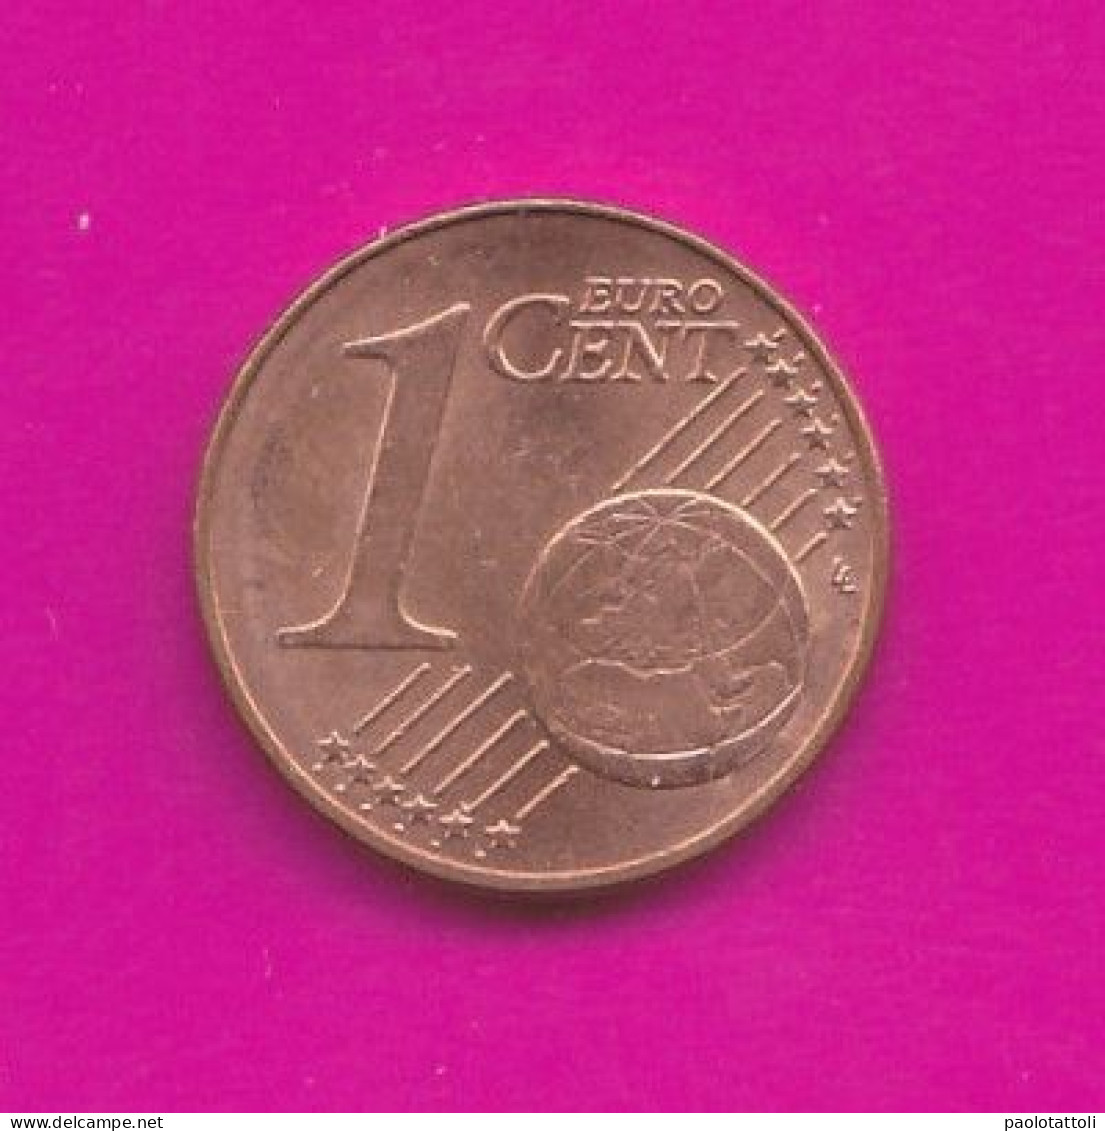 Germany, F 2018- 1 Euro Cent- Mint Of Stoccarda- Copper Plated Steel- Obverse Oak Leaf. Reverse Denomination- - Germany